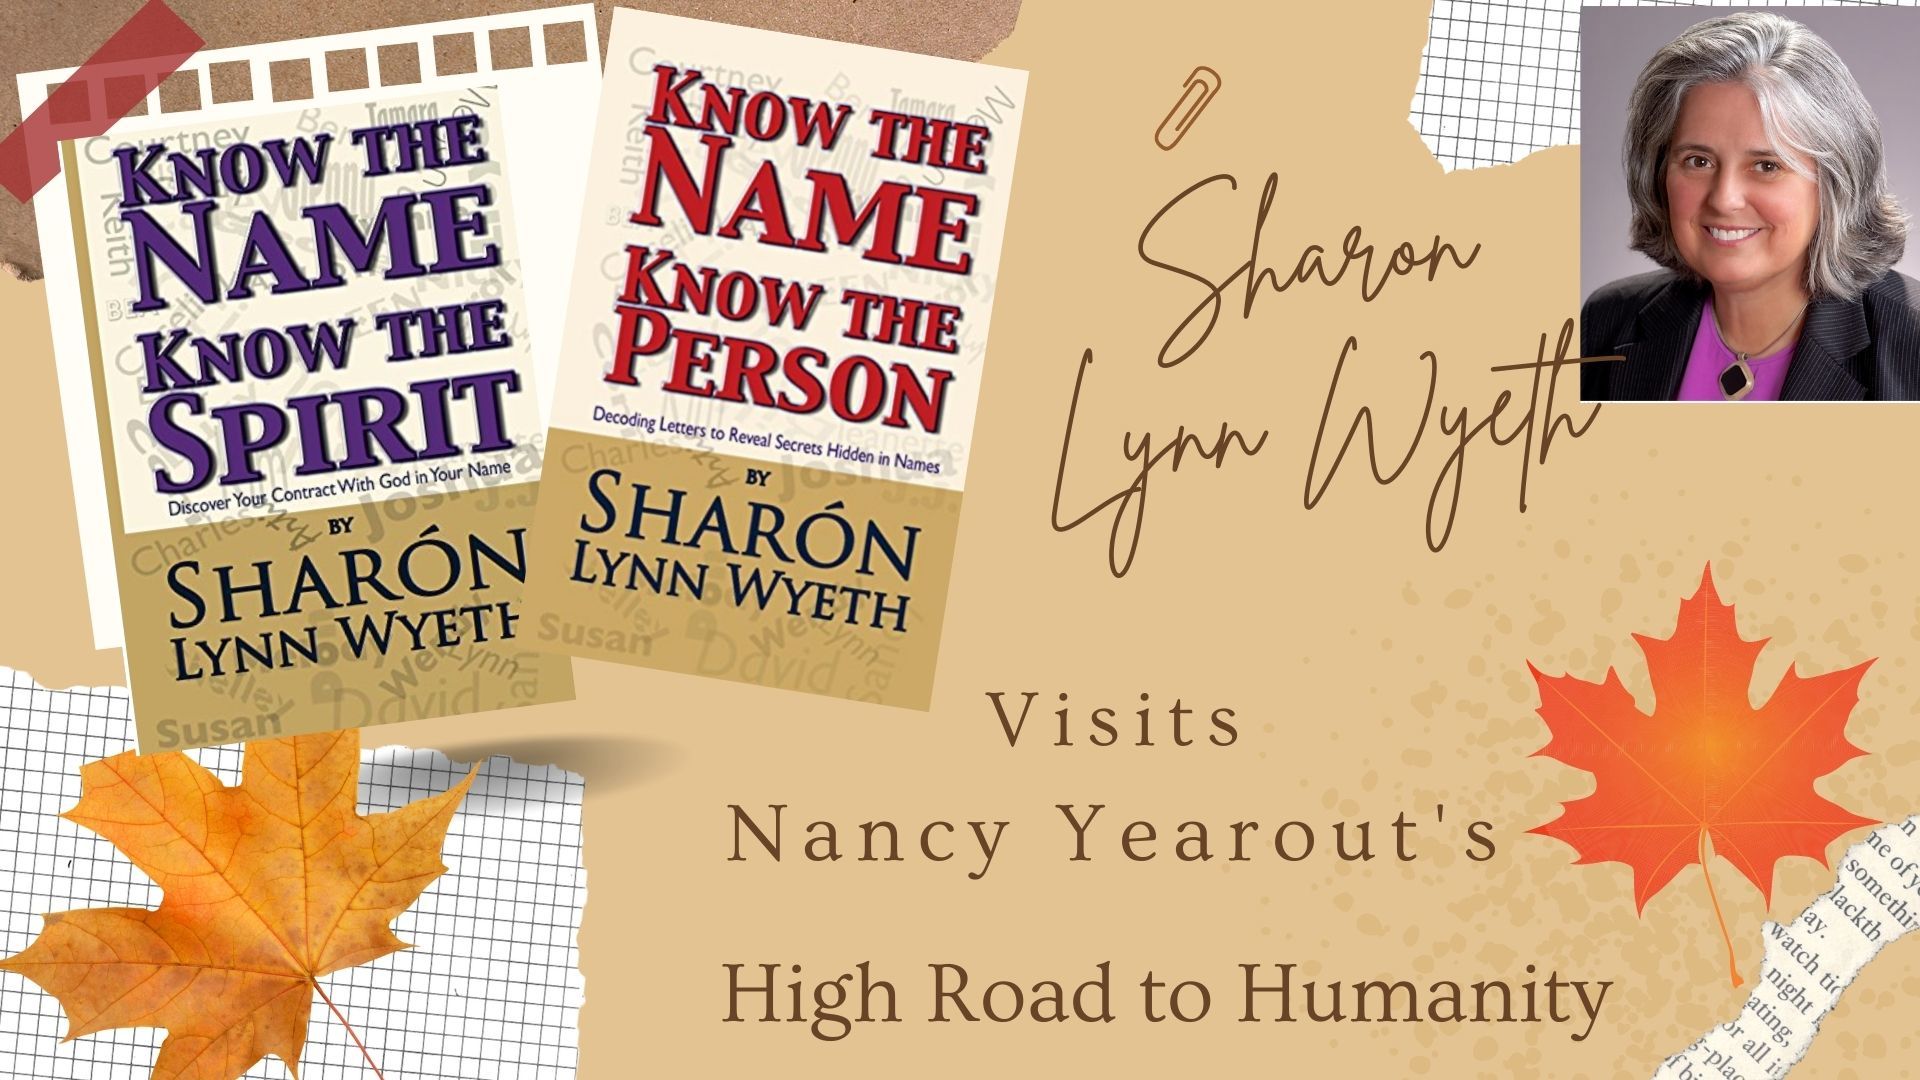 Know the Name Know Your Health- What Causes Dis-ease-ment in the Body with Sharon Lynn Wyeth